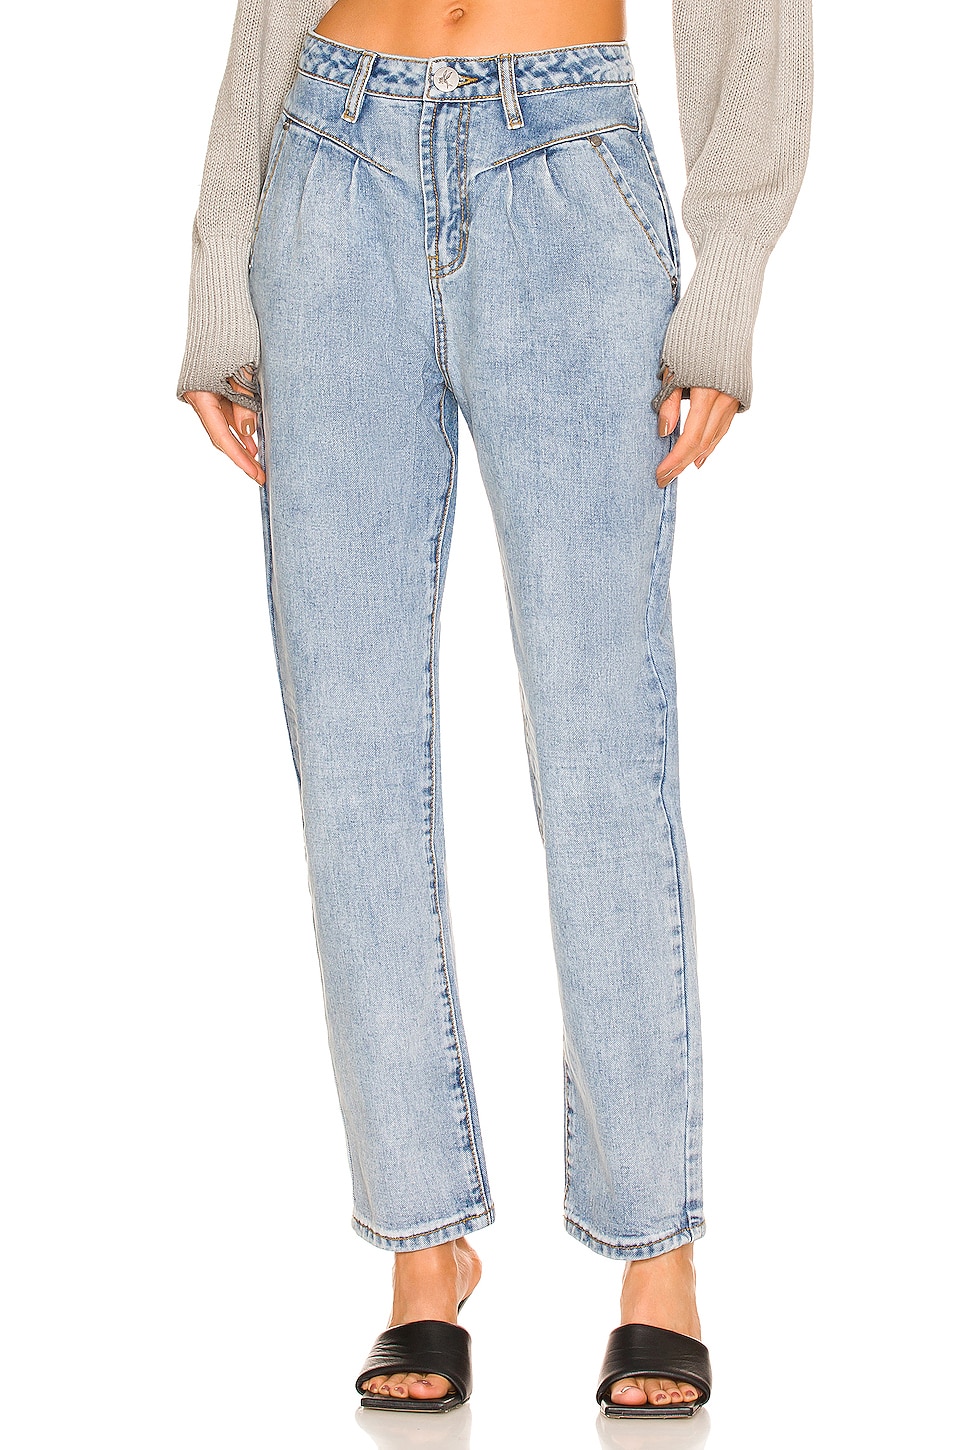 Streetwalkers High Waist 80s Fit Jean in Blue. Revolve Women Clothing Jeans High Waisted Jeans 